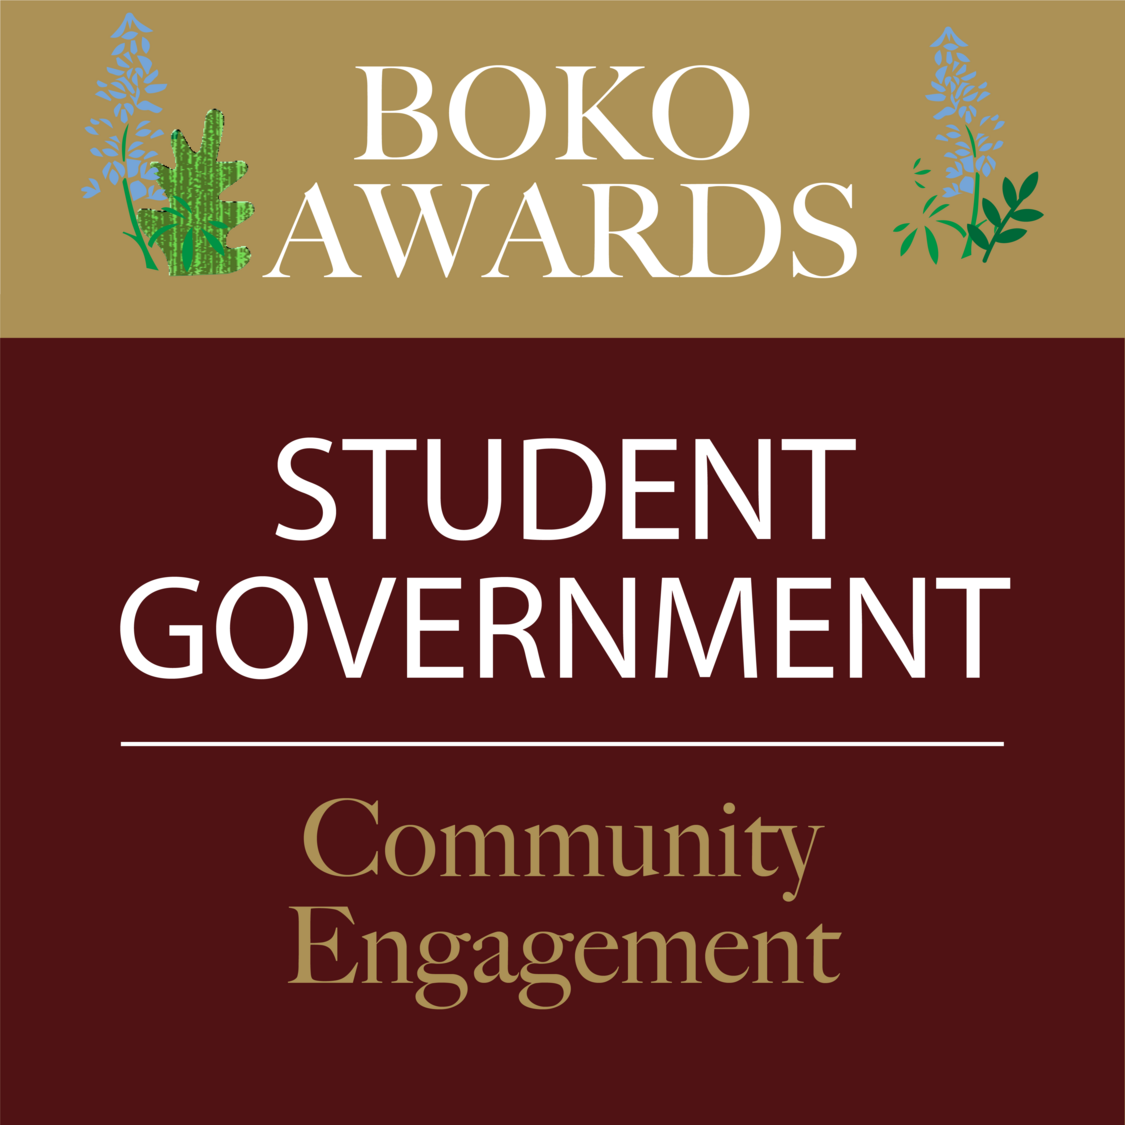 Picture of text displaying that Student Government won the Community Engagement award.